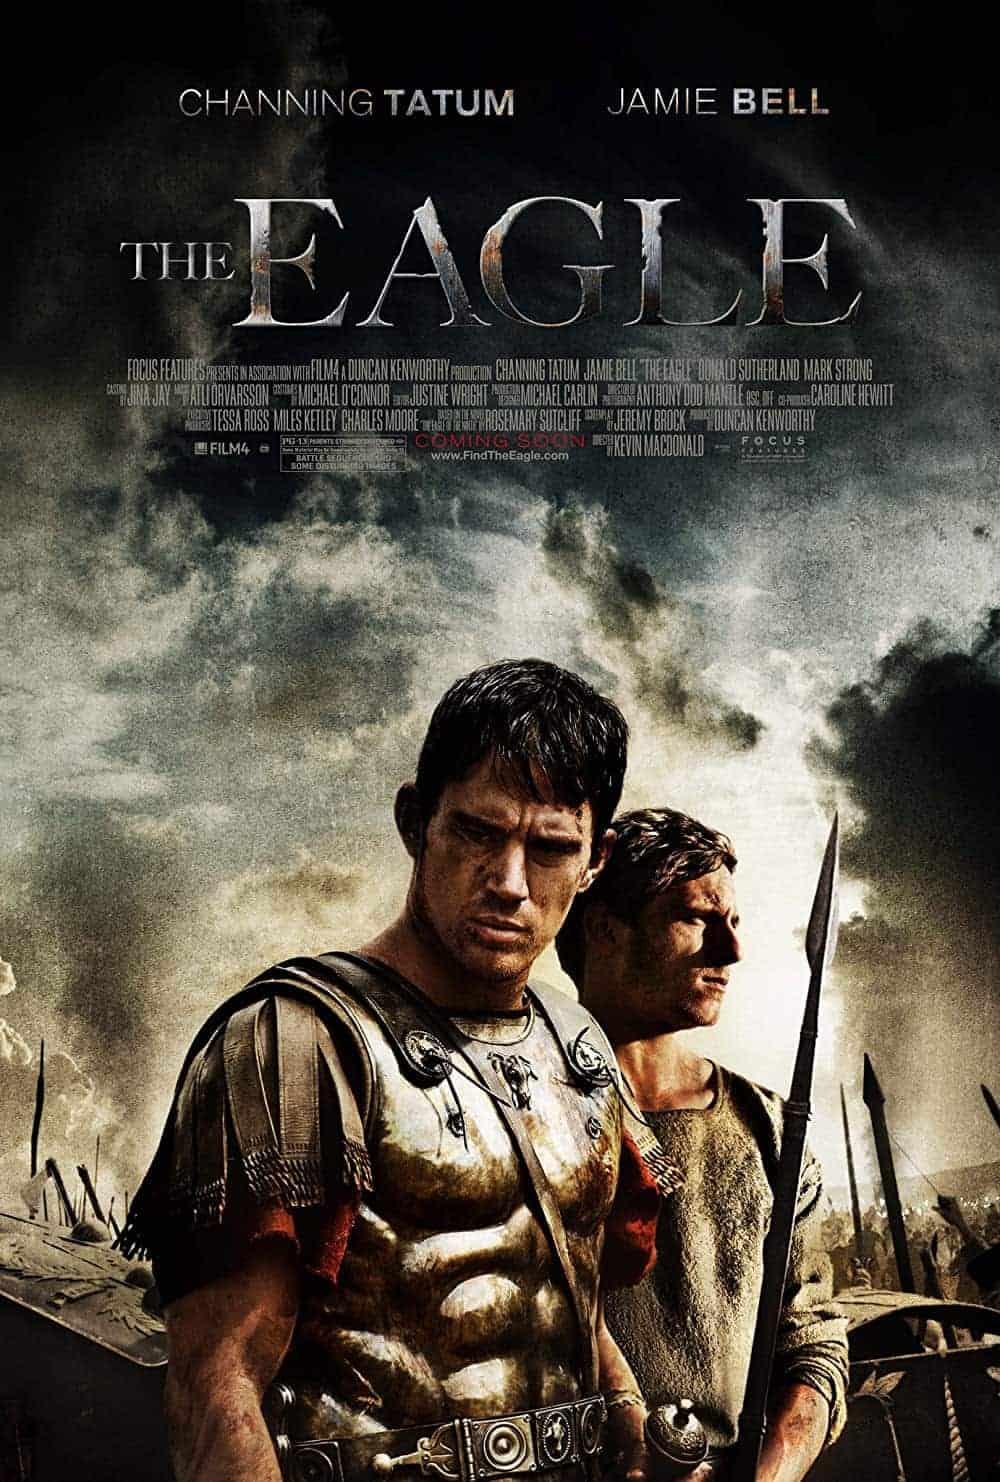 The Eagle (2011) Best Movies About Rome to Watch and Re-Watch